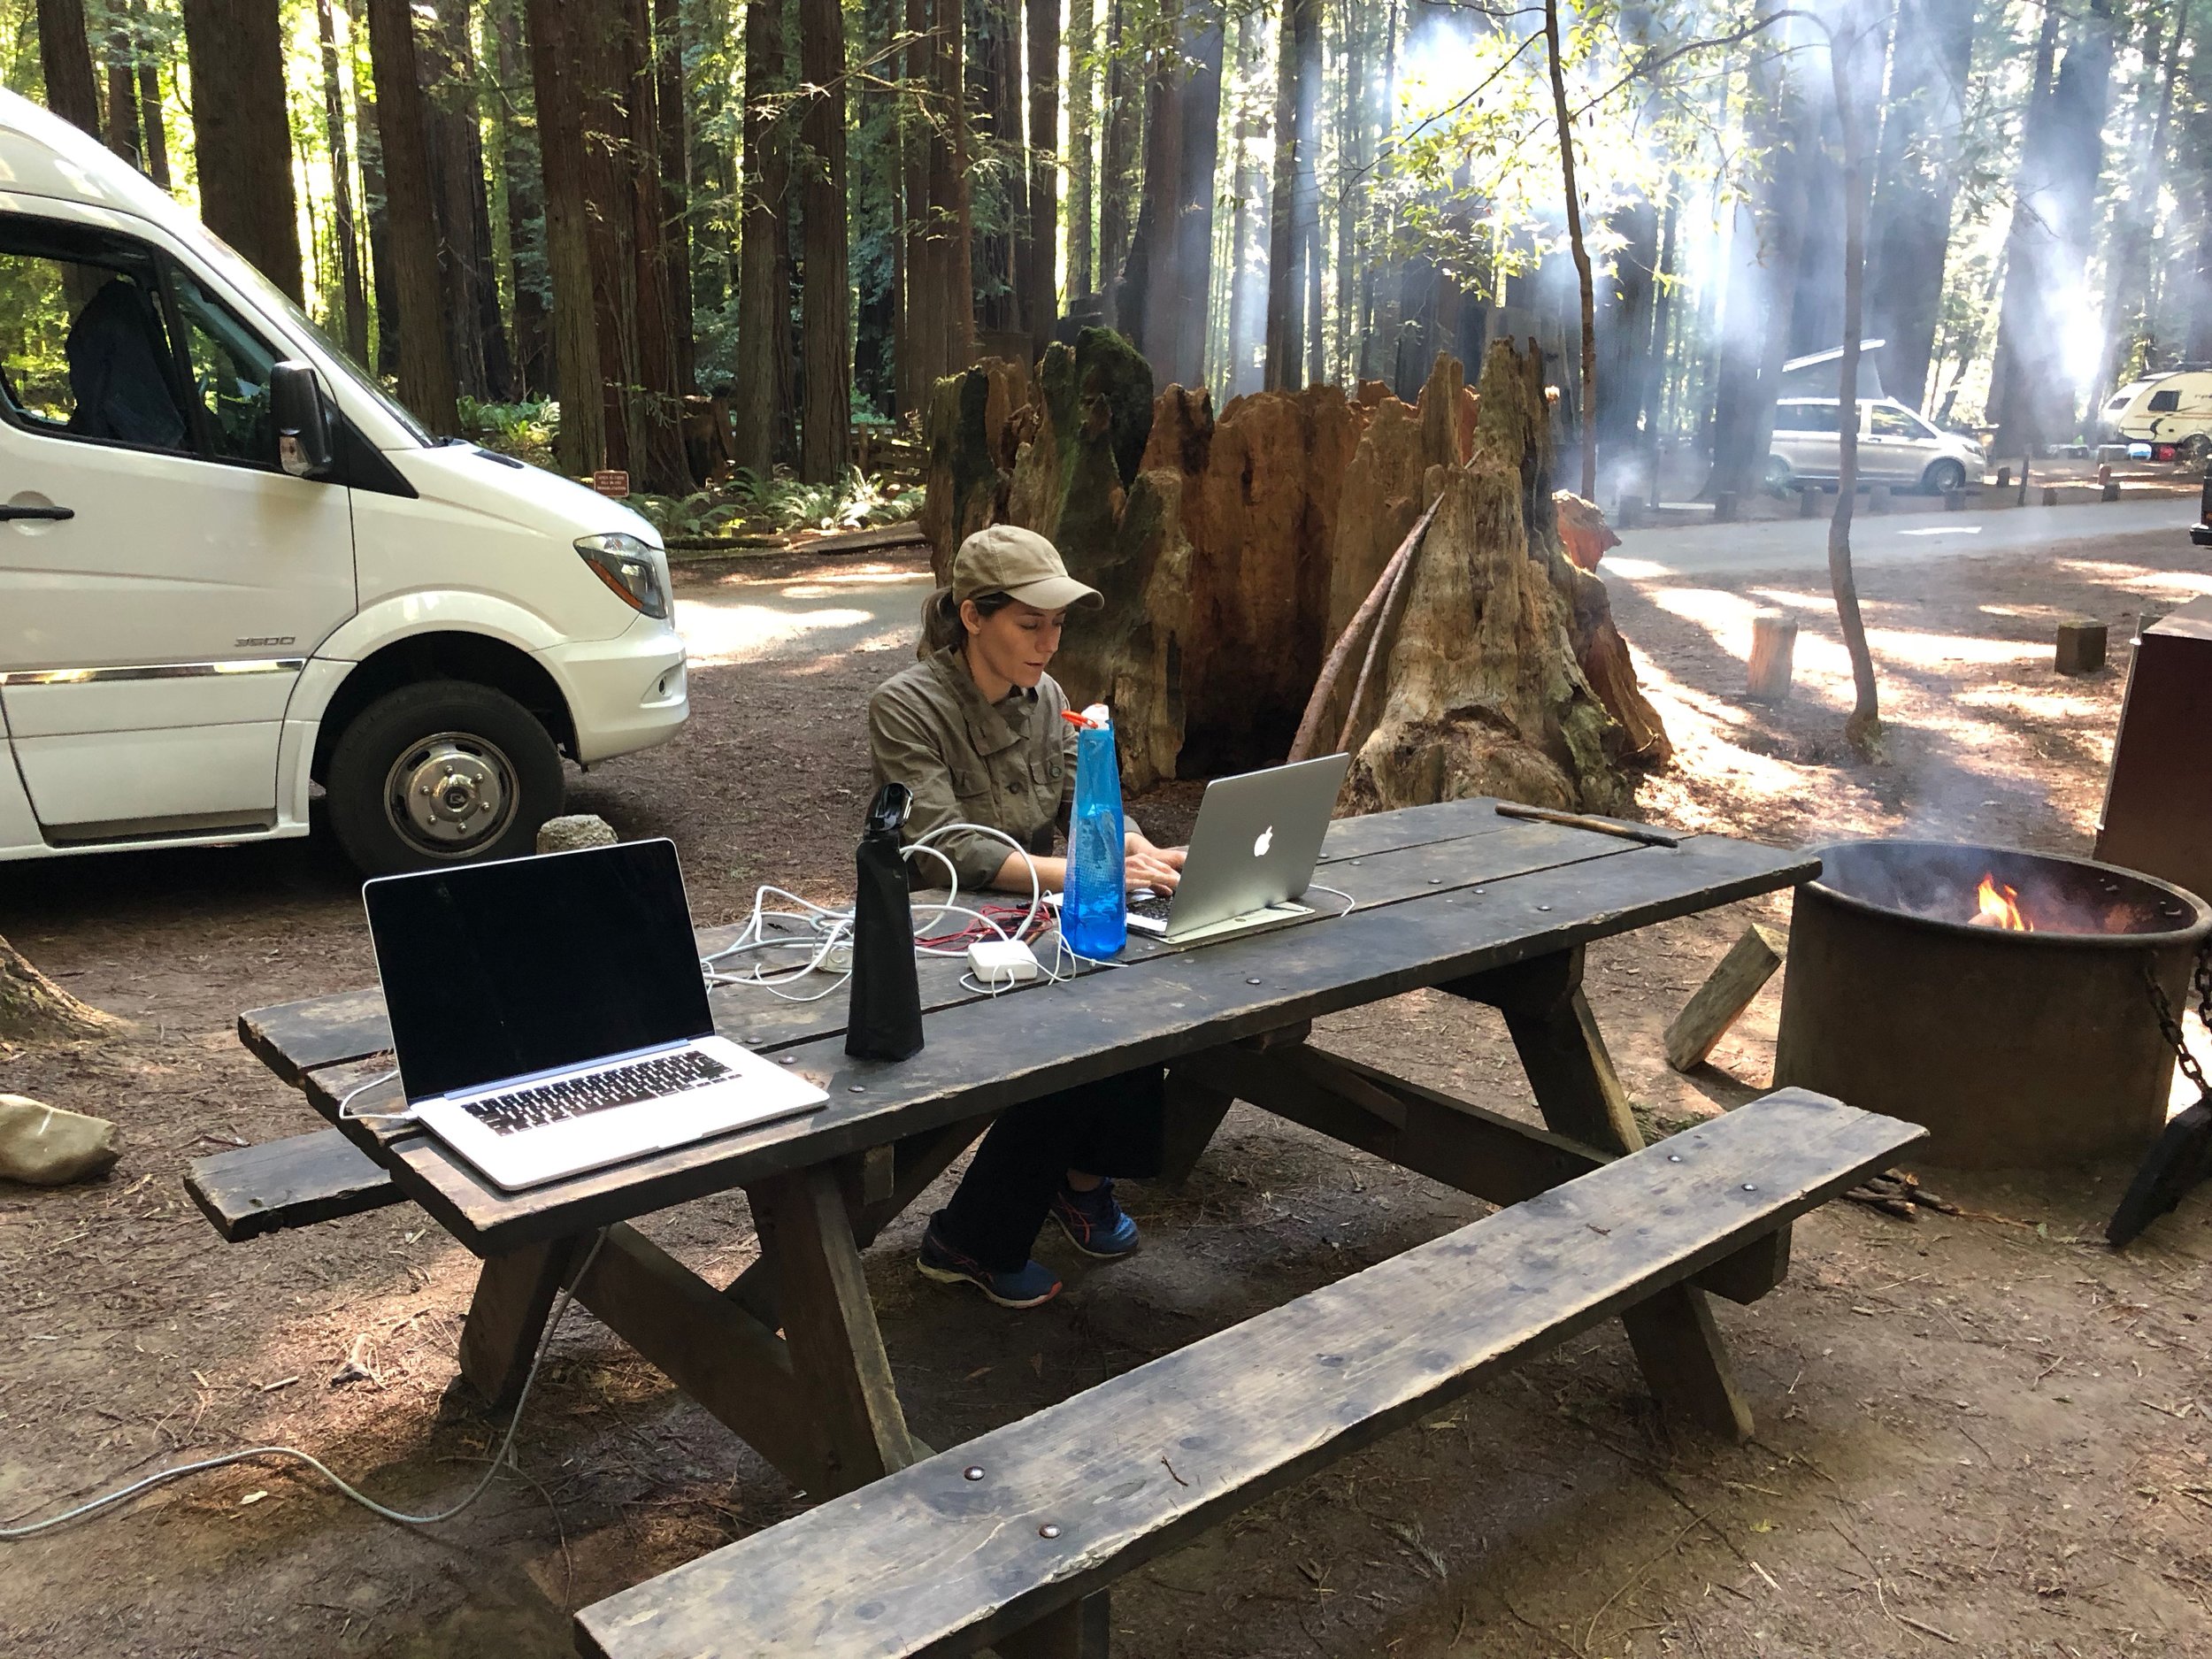 Working by a campfire among the redwoods, just like our ancestors